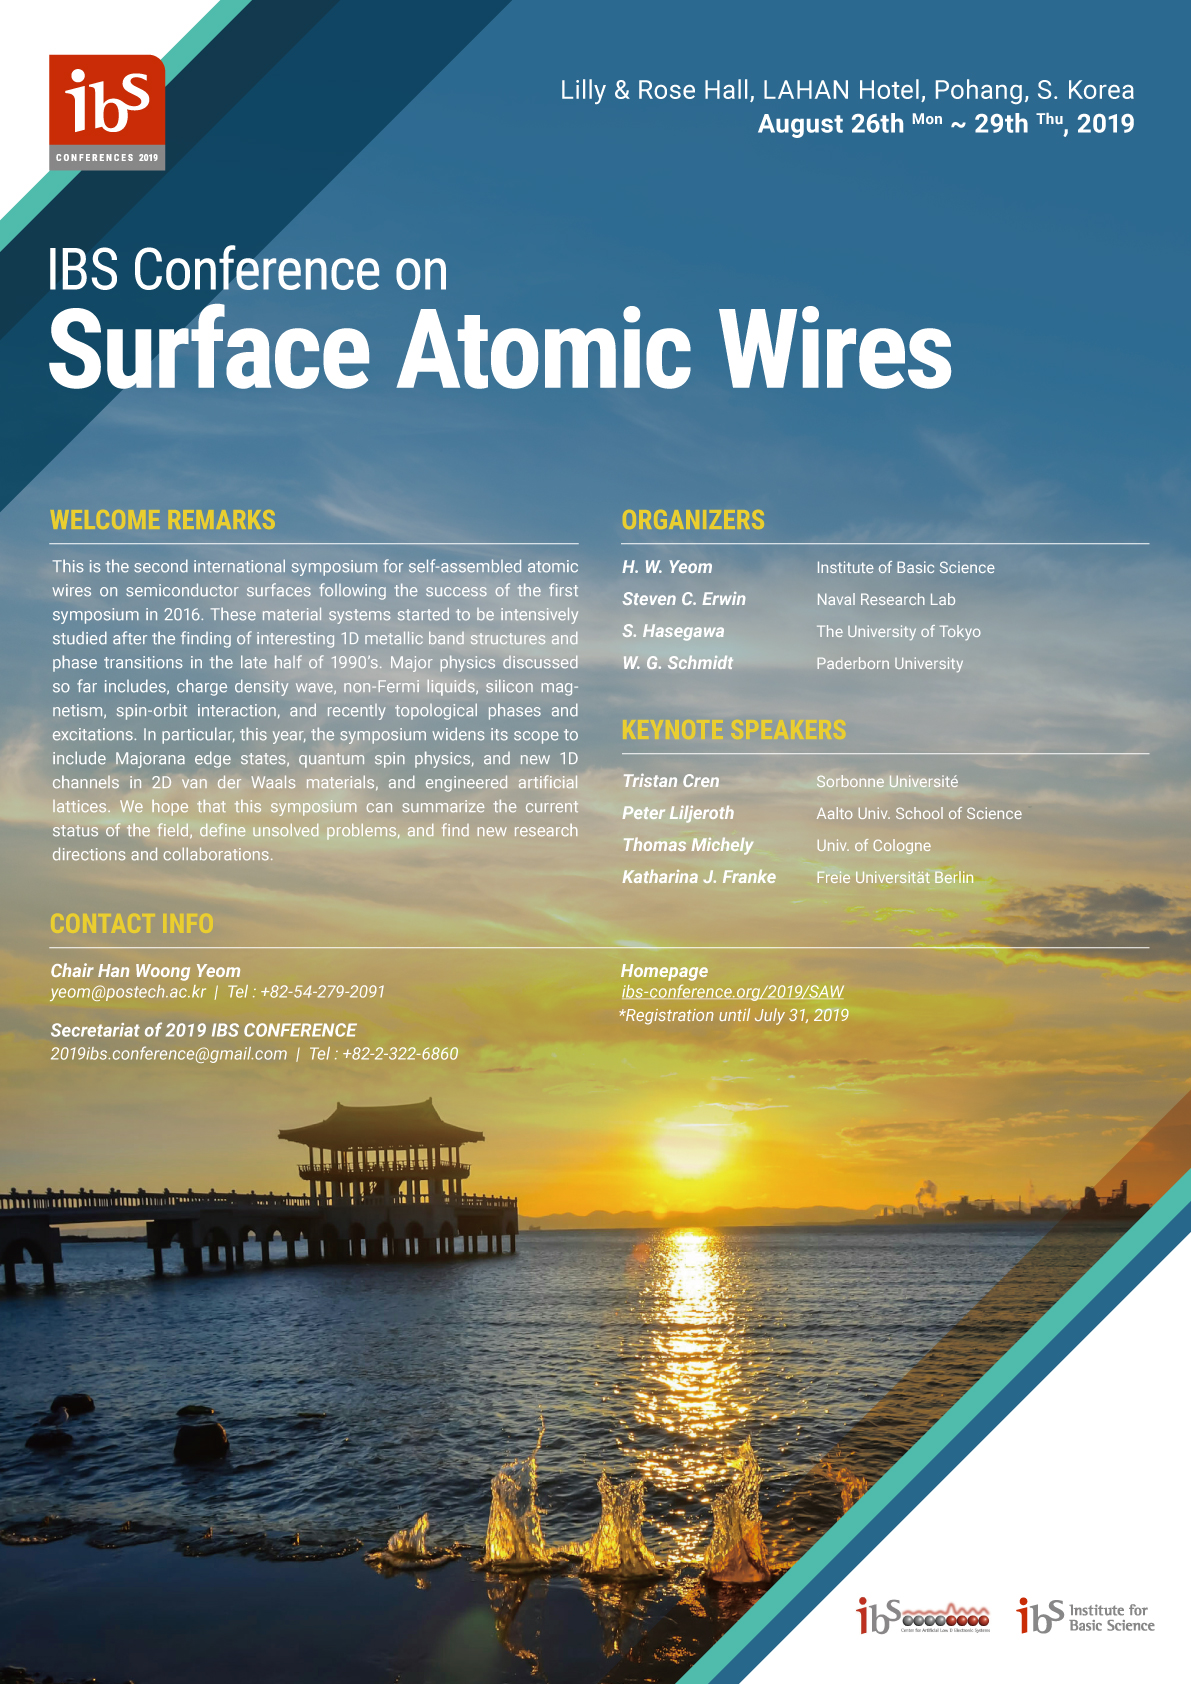 2019 IBS Conference on Surface Atomic Wires 사진